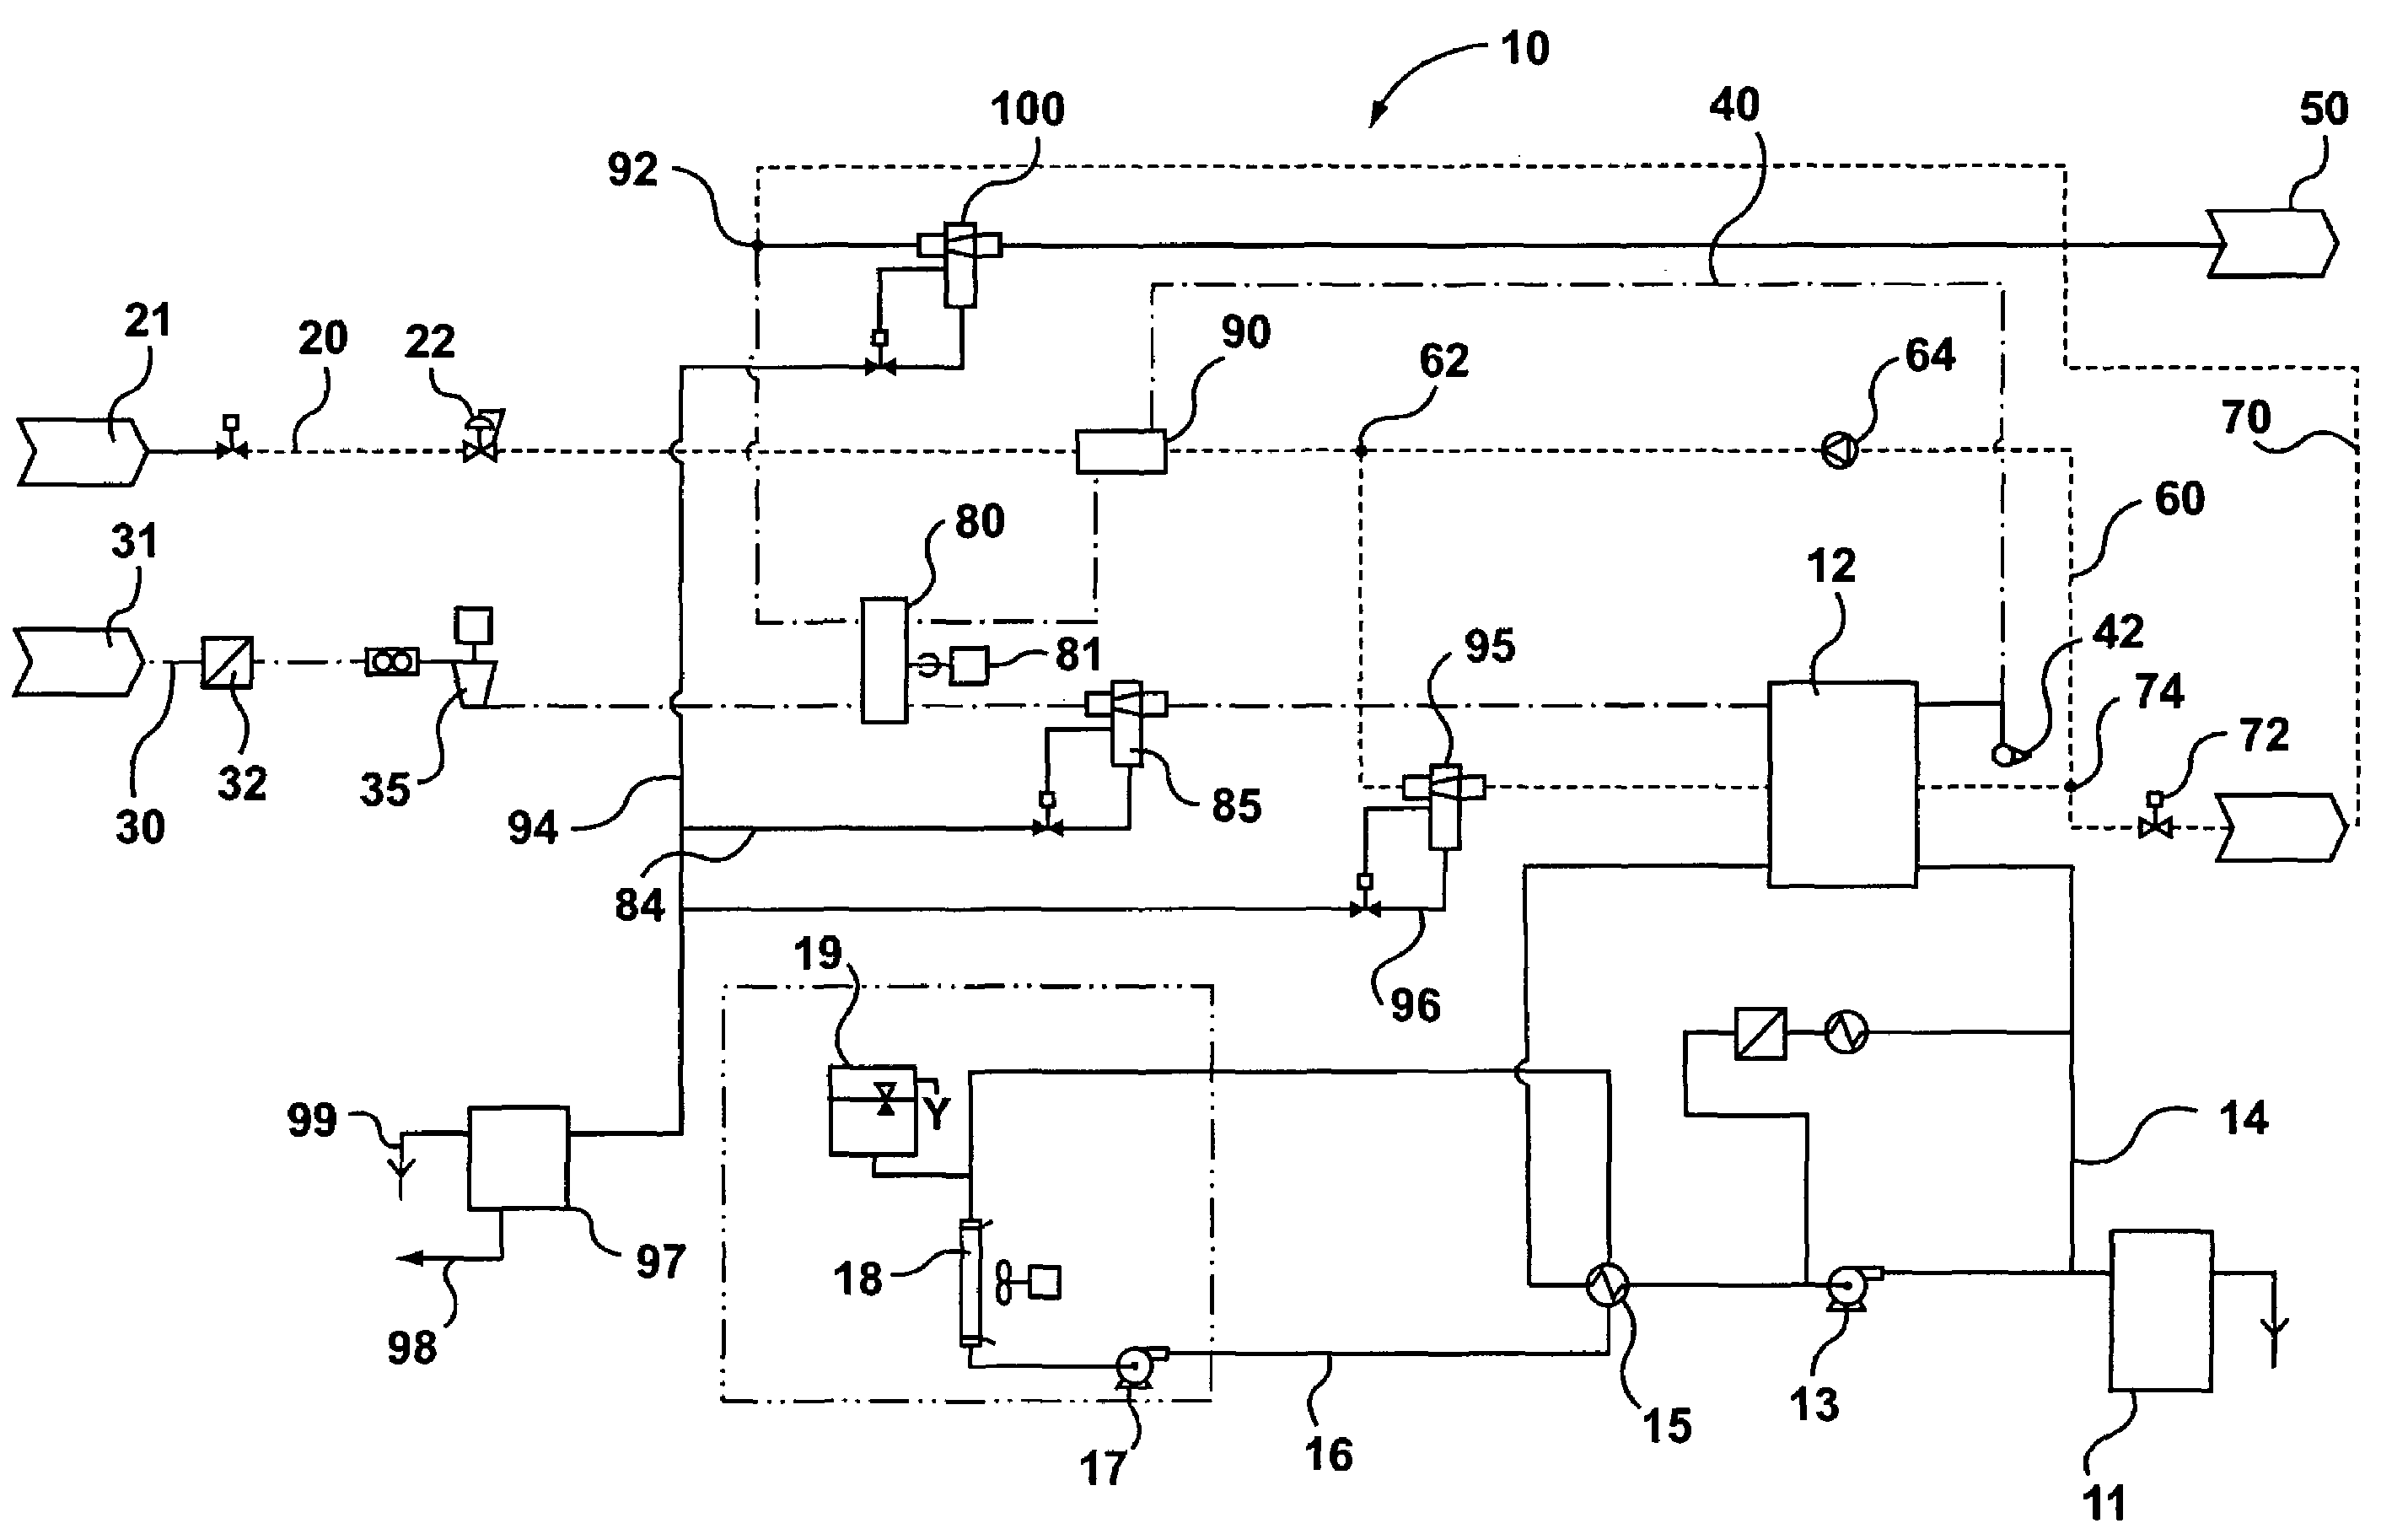 System and method for management of gas and water in fuel cell system